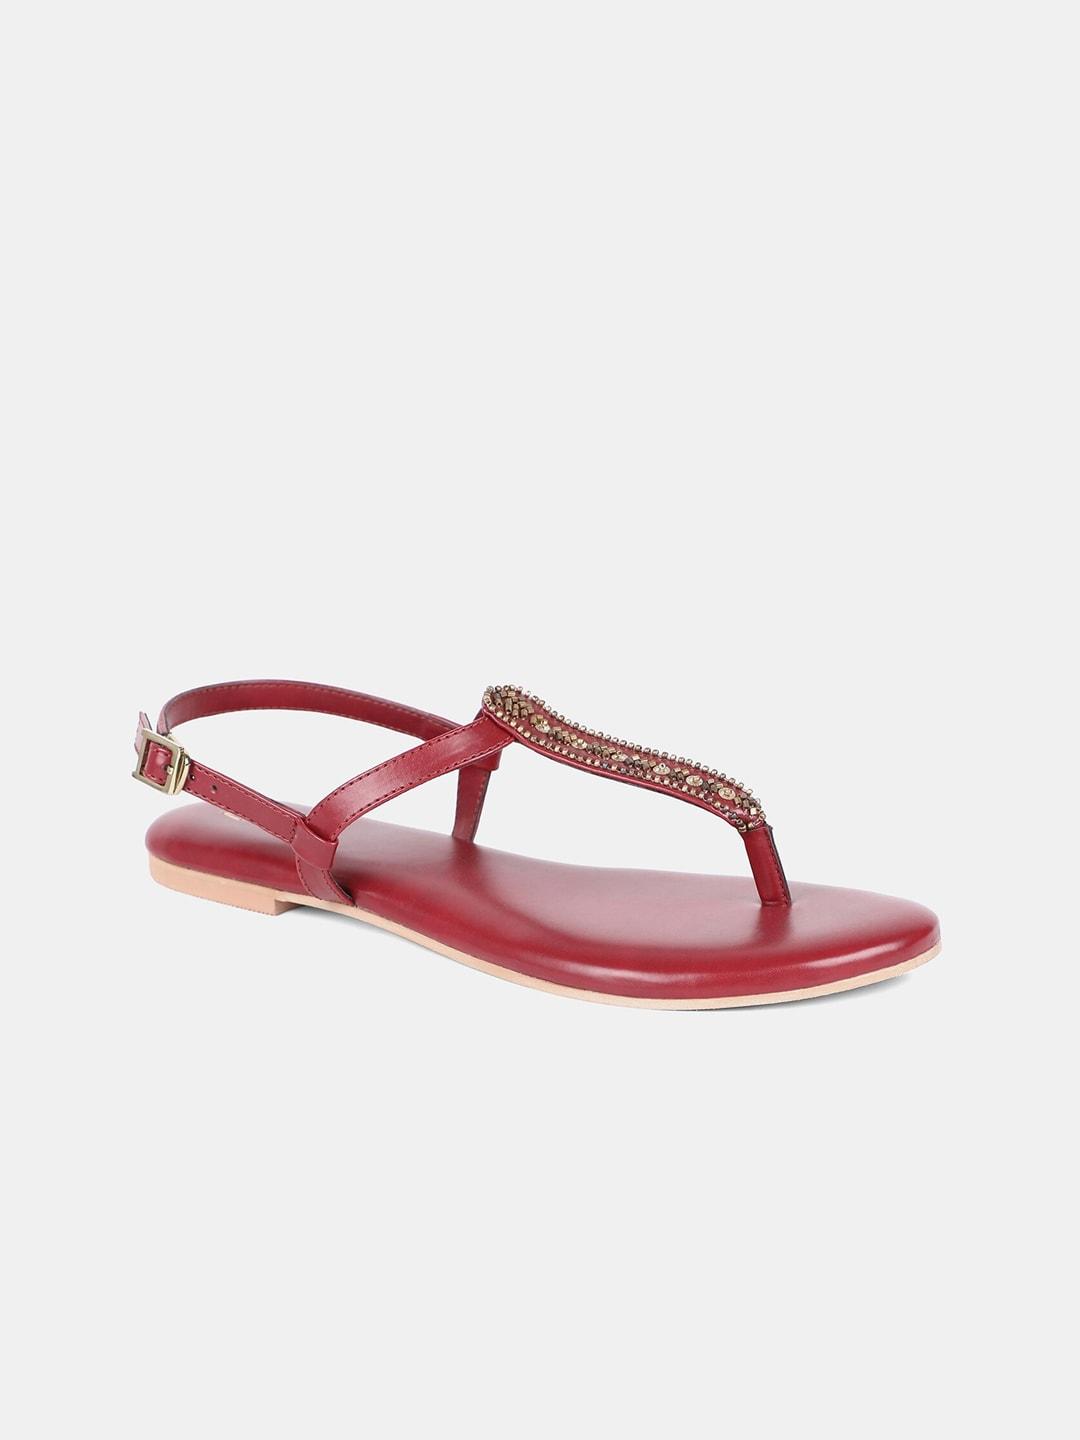 W Women Red Embellished Leather Party T-Strap Flats